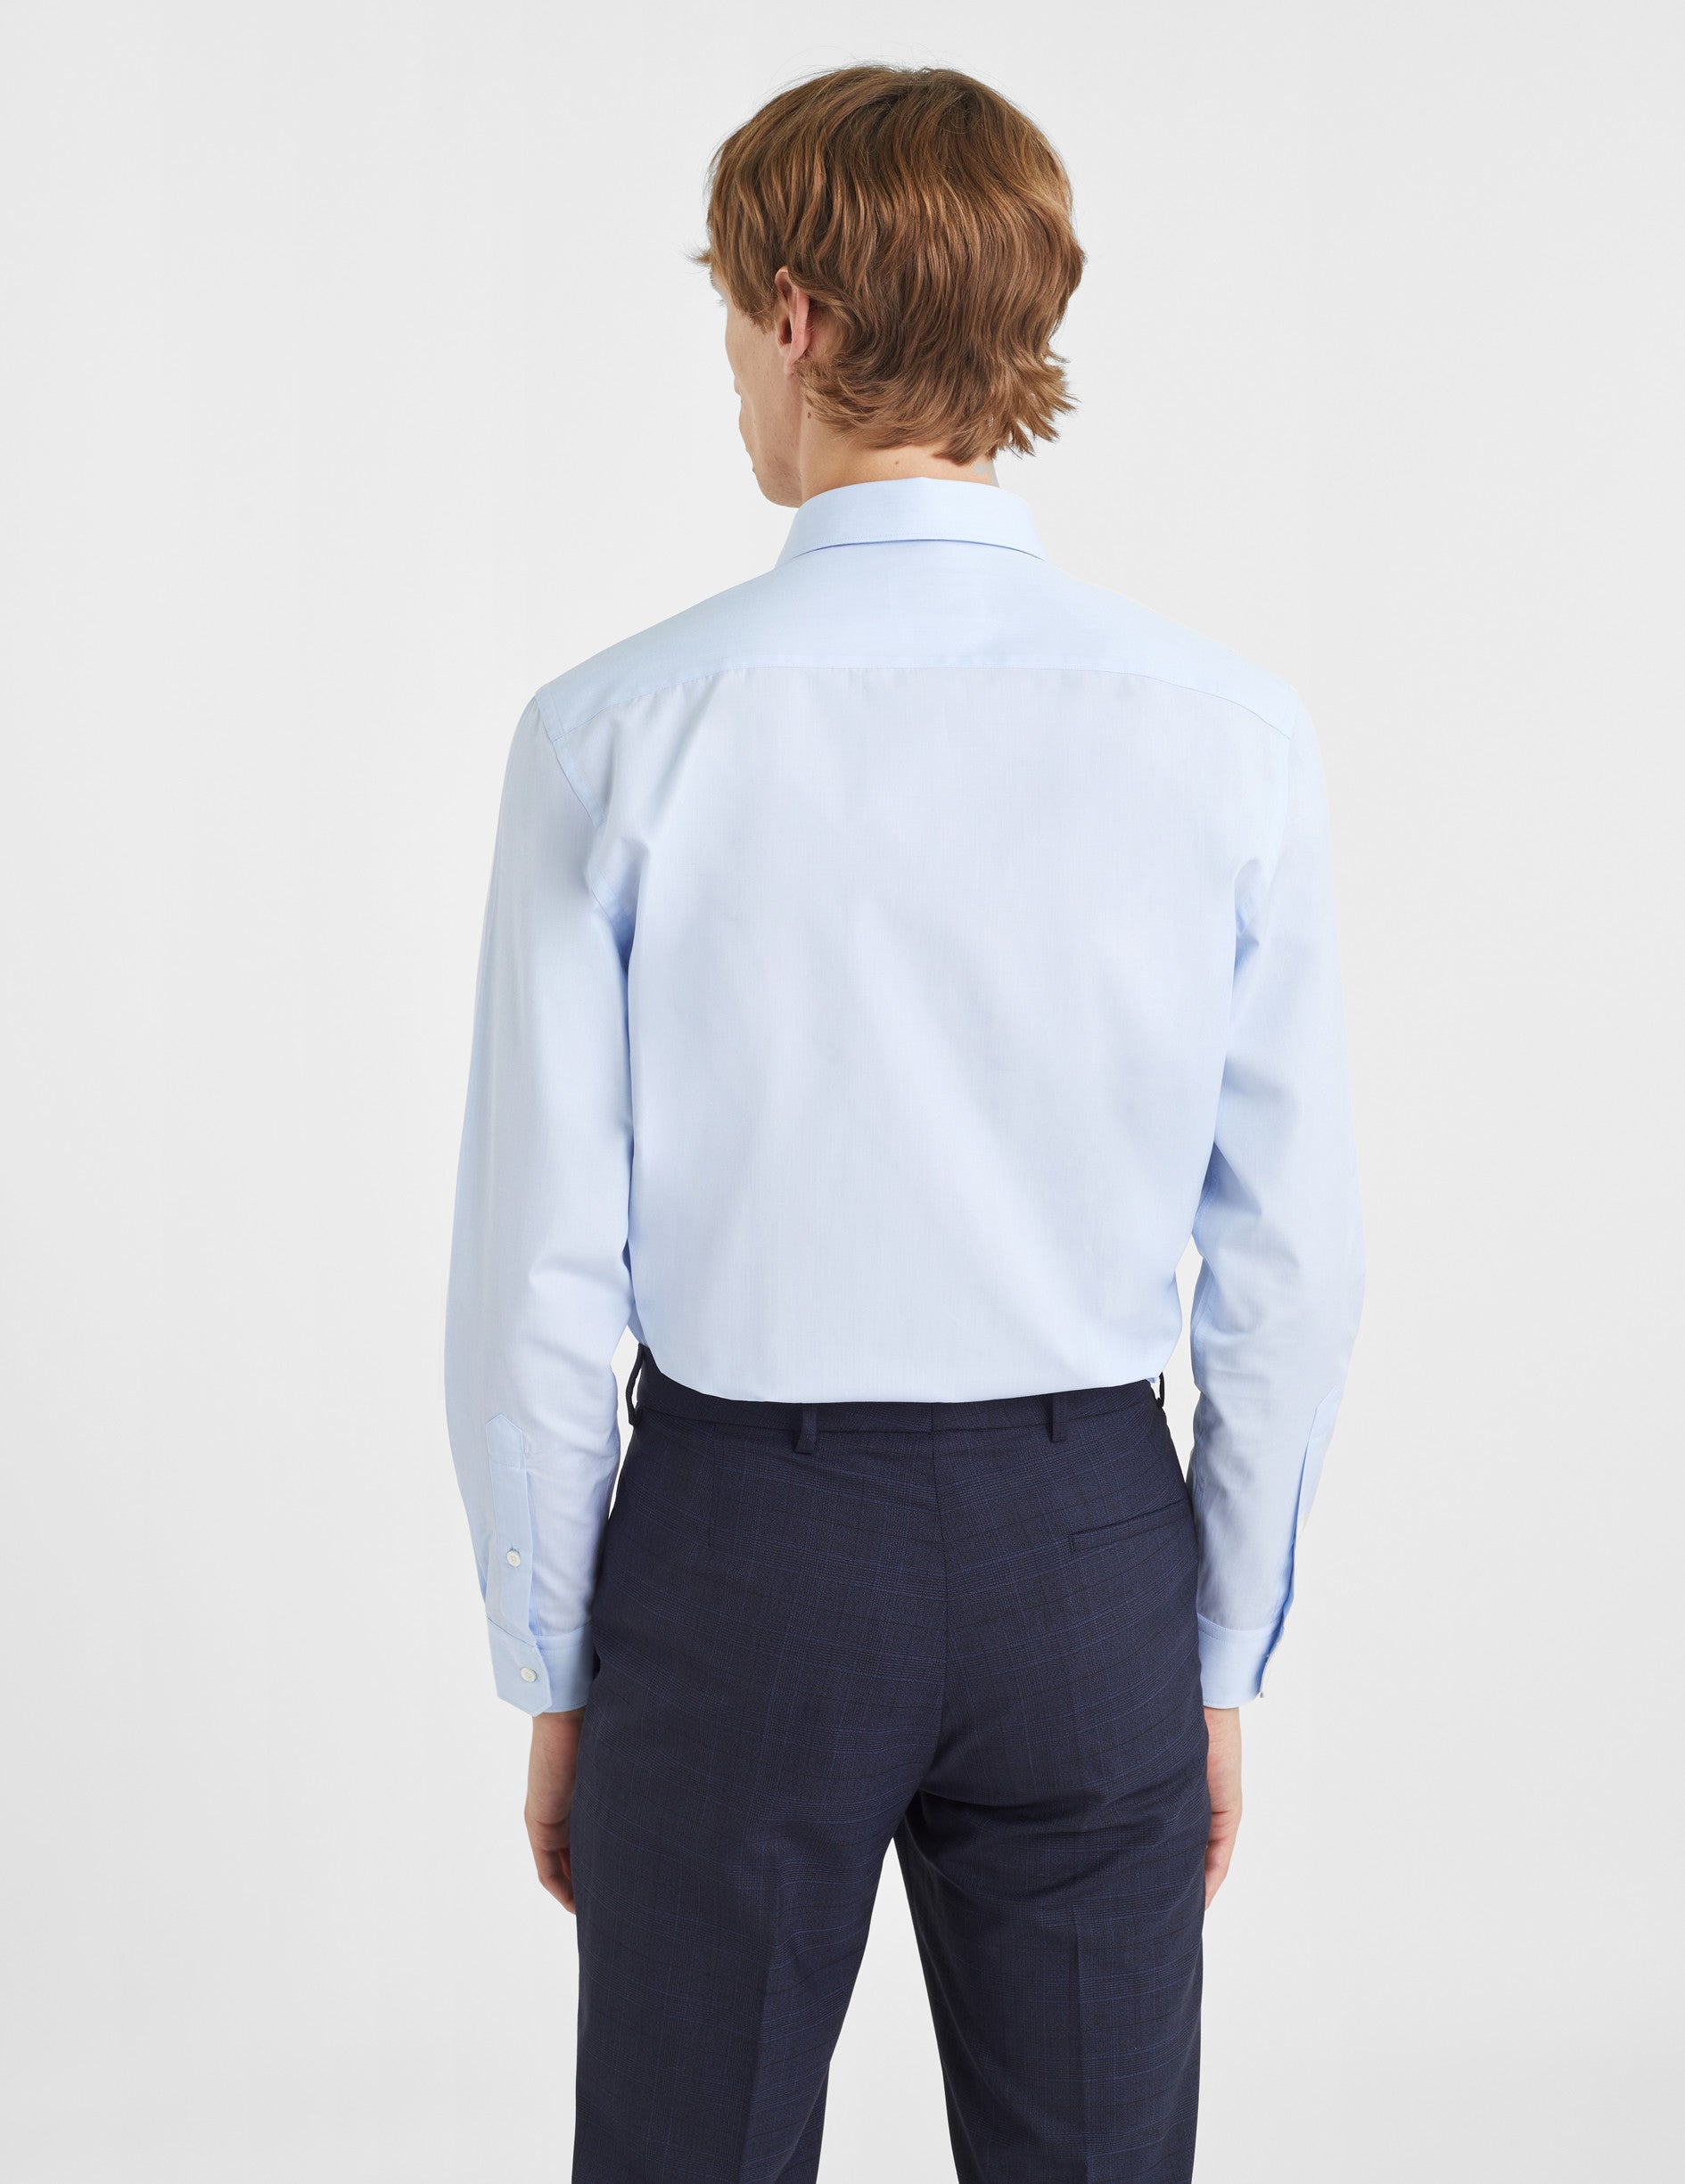 Semi-fitted blue shirt - Wire to wire - Figaret Collar